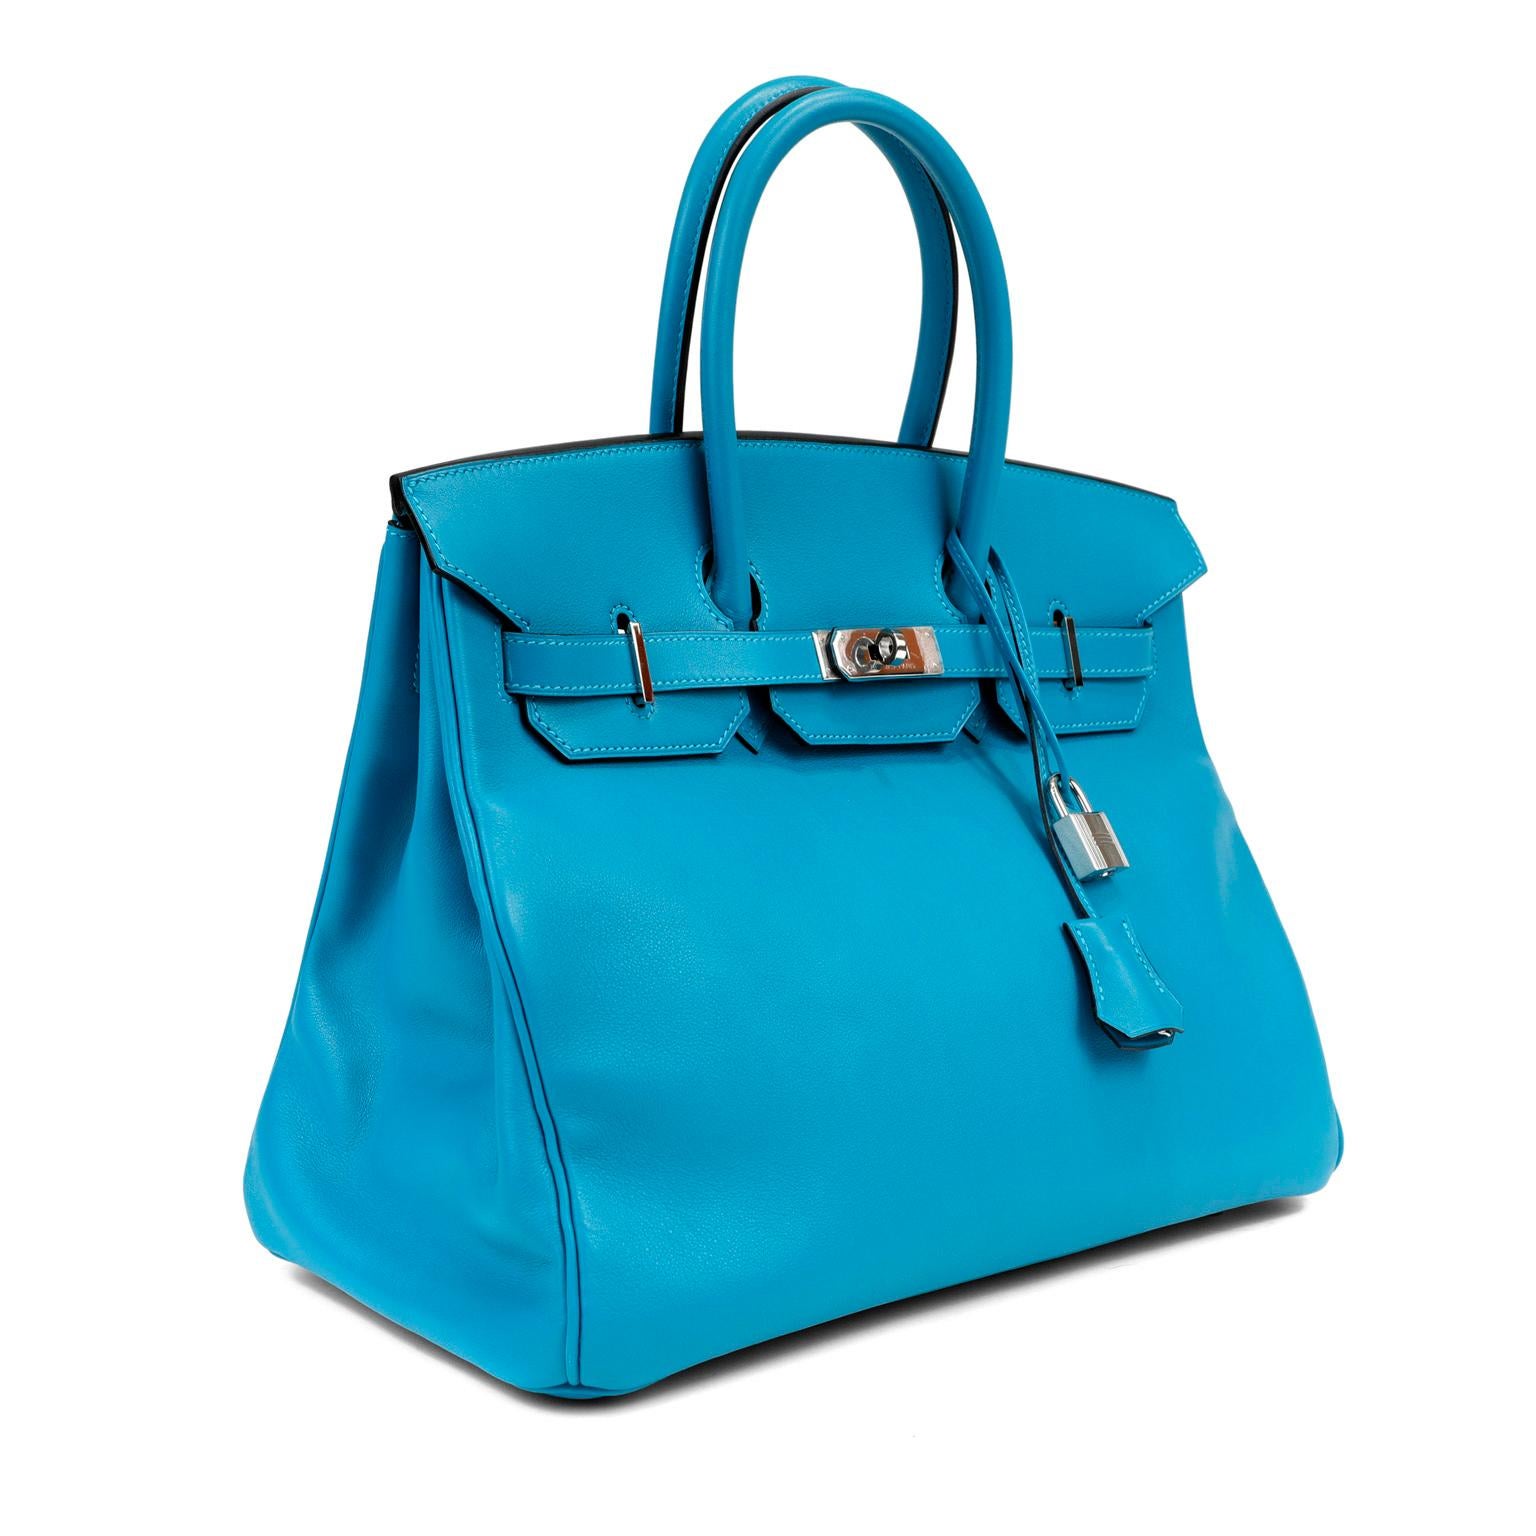 This authentic Hermès Turquoise Swift Leather 35 cm Birkin Bag is in pristine condition with plastic intact on the hardware.  Long waitlists are commonplace for the intensely coveted classic leather Birkin bag.  Each piece is hand sewn by skilled